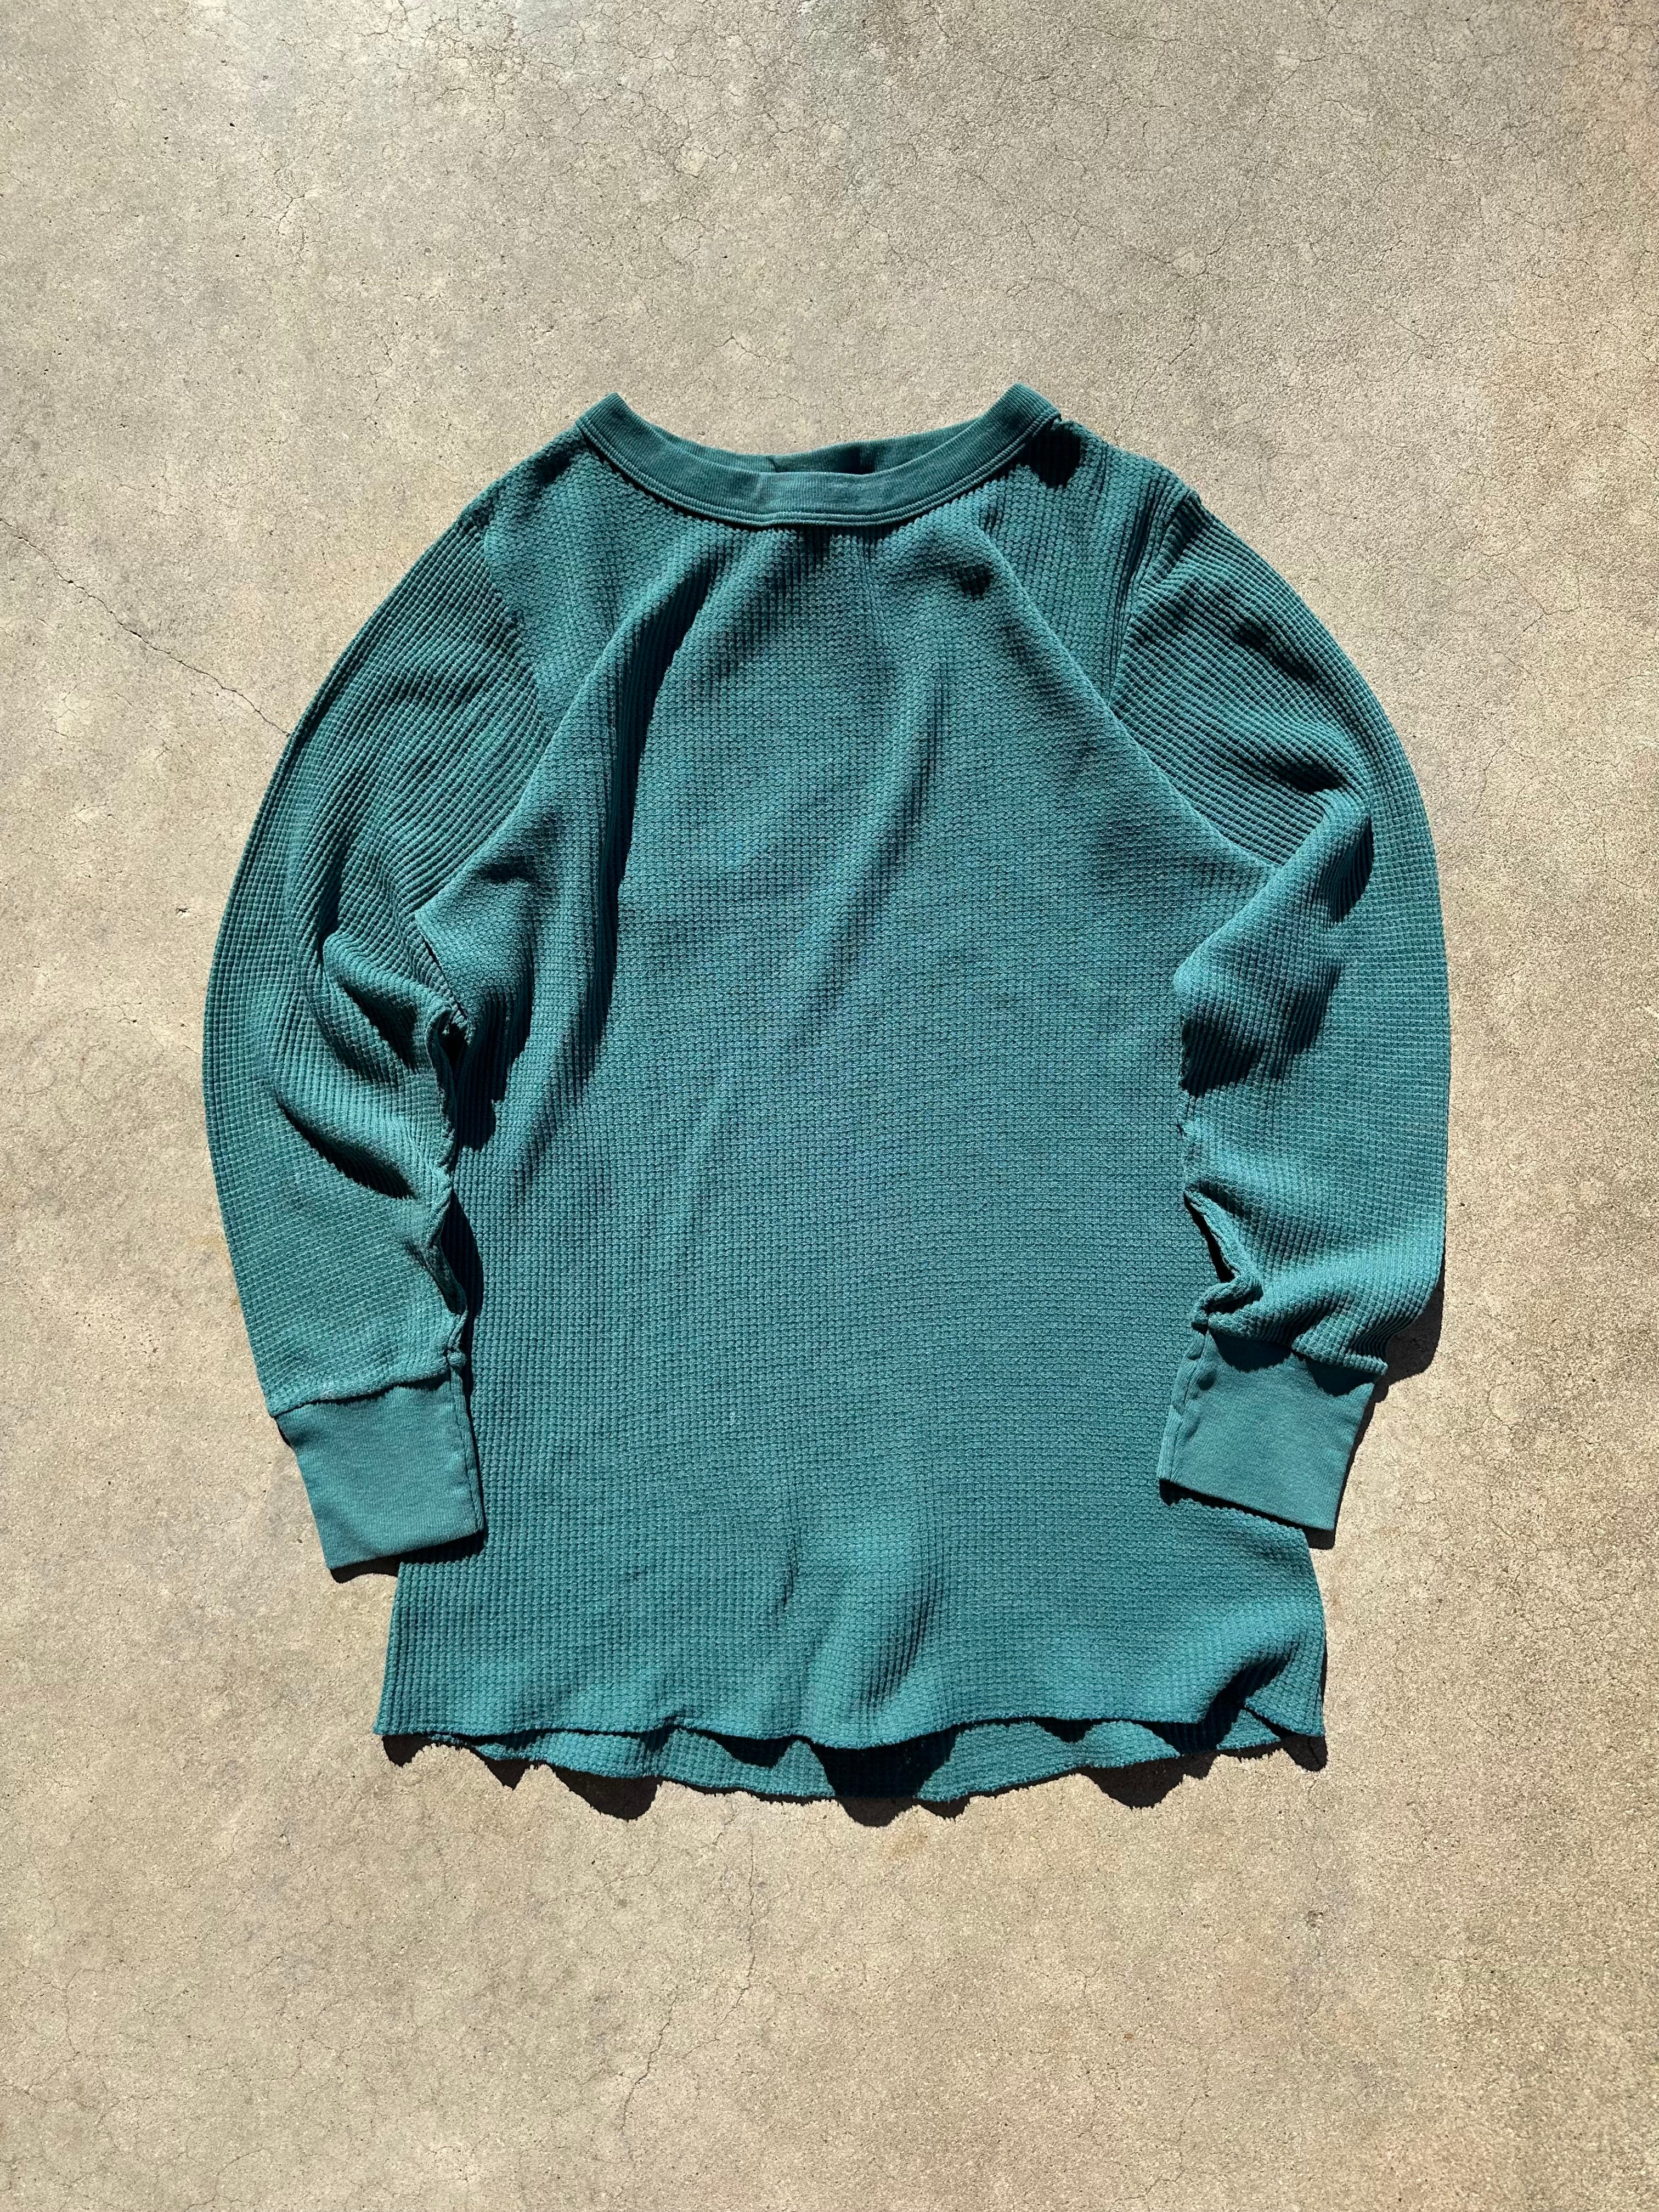 1980s Forrest Green Thermal (S/M)